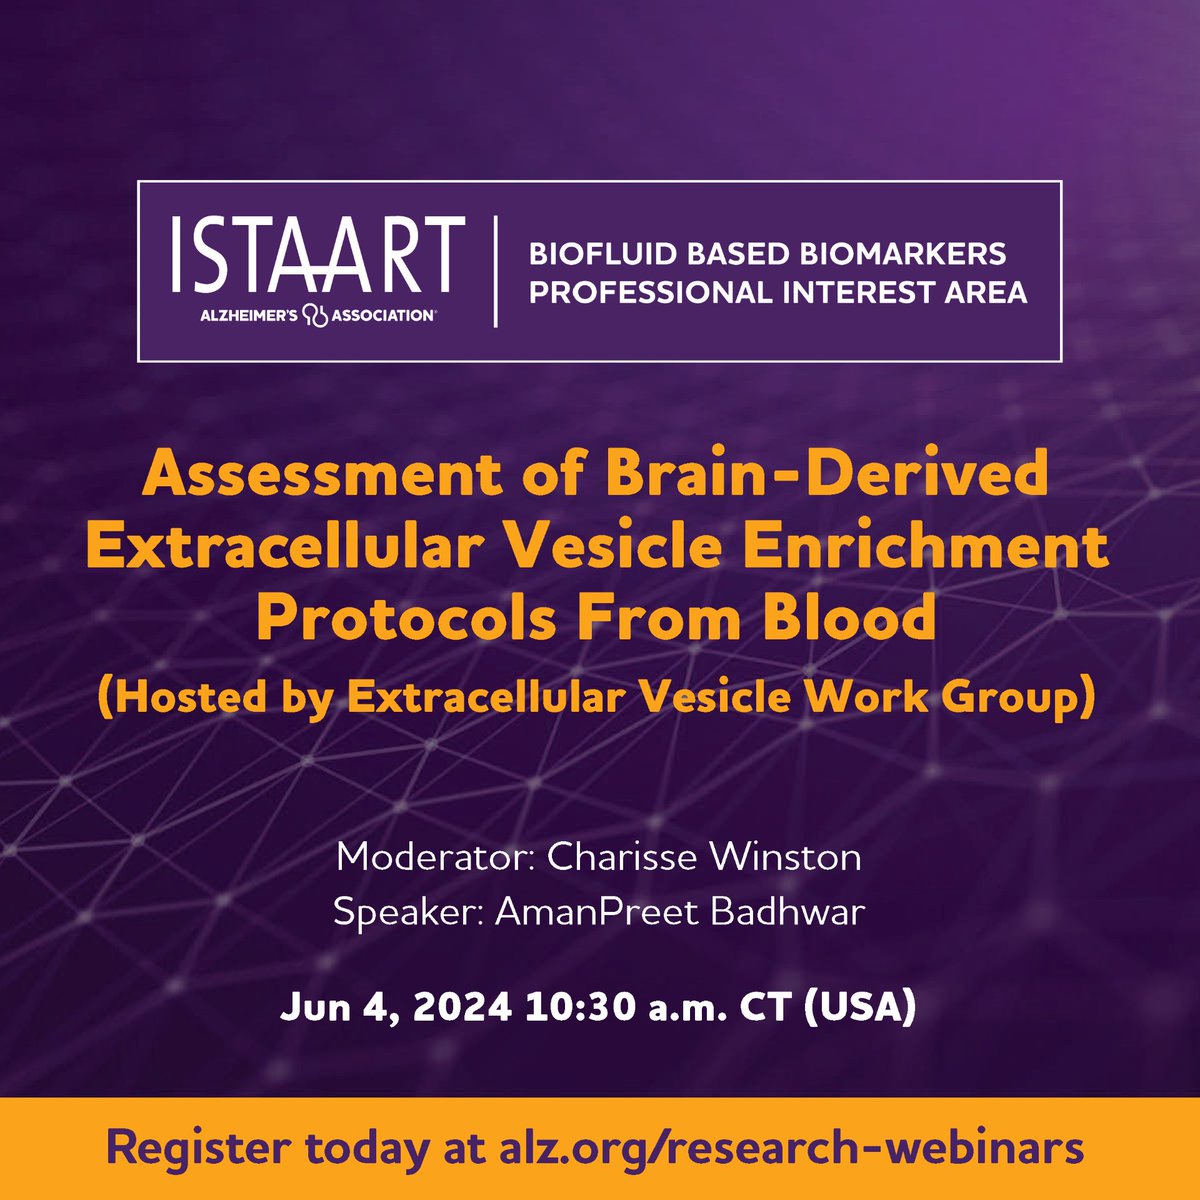 Honored to be invited to give this lecture on work conducted by us at ISTAART Alzheimer's Association's Biofluid Based Biomarkers - Extracellular Vesicle (EV) Work Group. @Badhwar_MindLab  is intensely researching brain-derived EVs in blood as potential AD biomarkers.